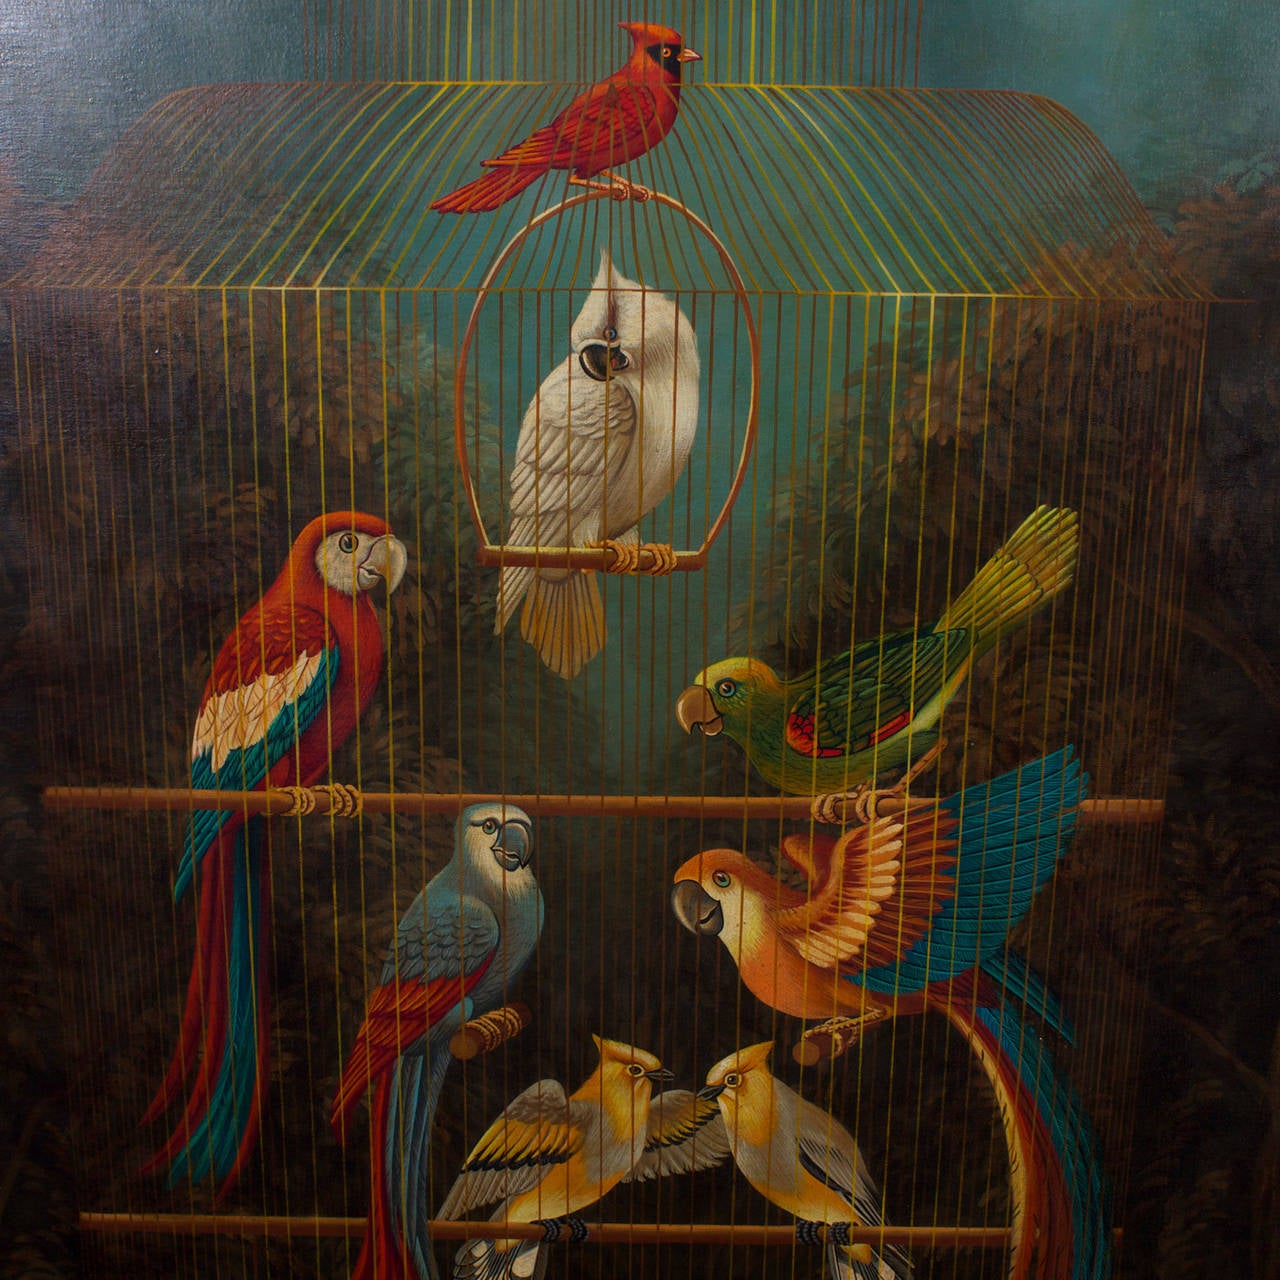 Large, fanciful oil on canvas painting of a gilded cage filled with a colorful assortment of parrots and a cardinal, posing for a portrait, set in an outdoor setting and signed Skilling on the lower right. Original gilt frame.